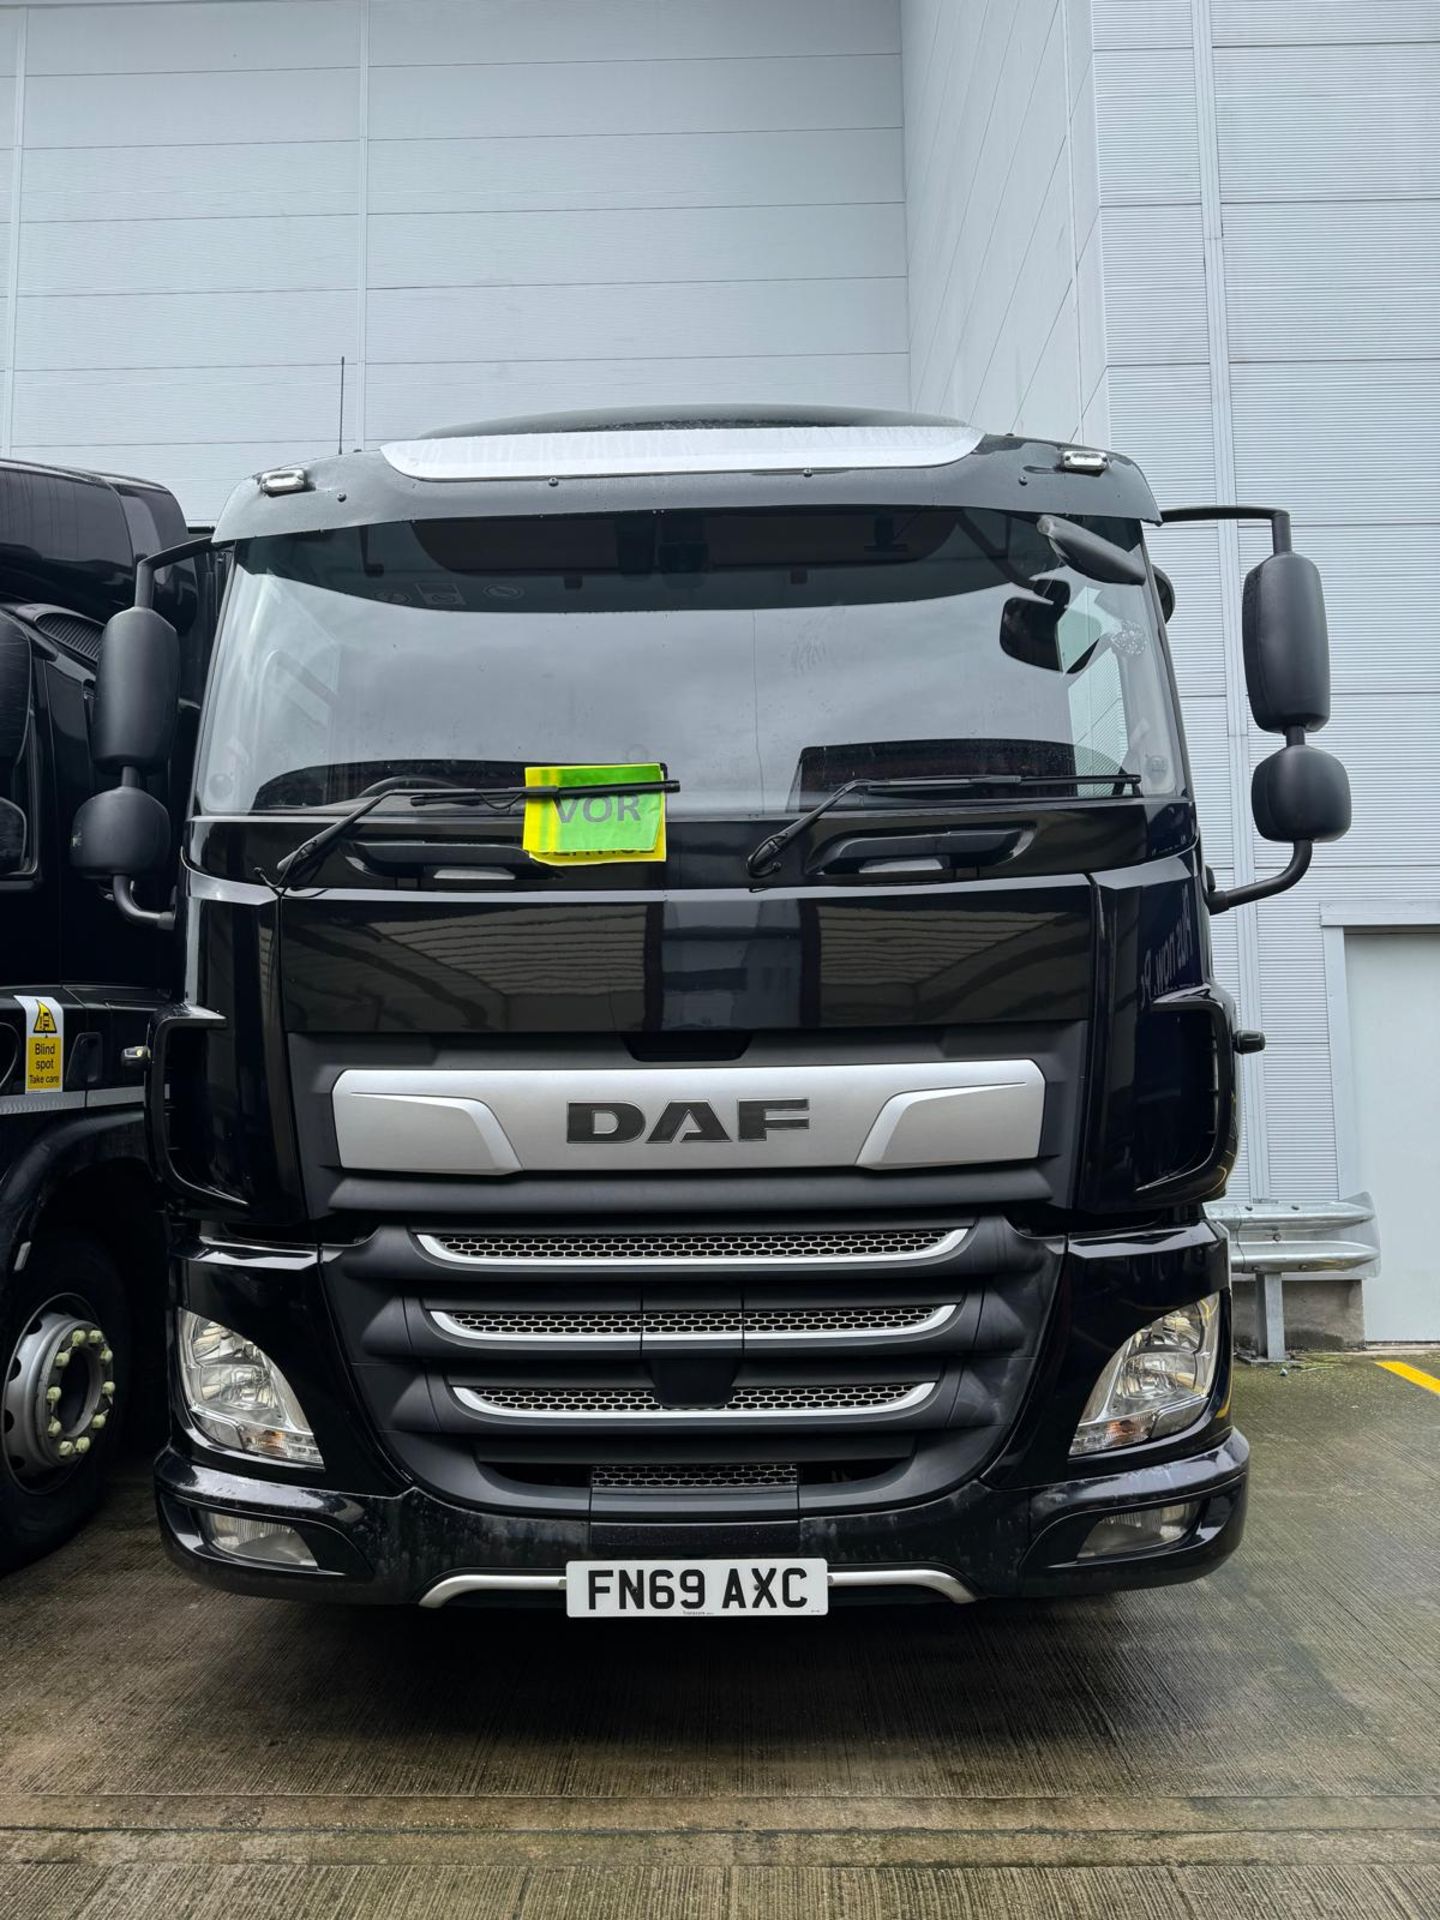 2019, DAF CF 260 FA (Ex-Fleet Owned & Maintained) - FN69 AXC (18 Ton Rigid Truck with Tail Lift) - Bild 3 aus 17